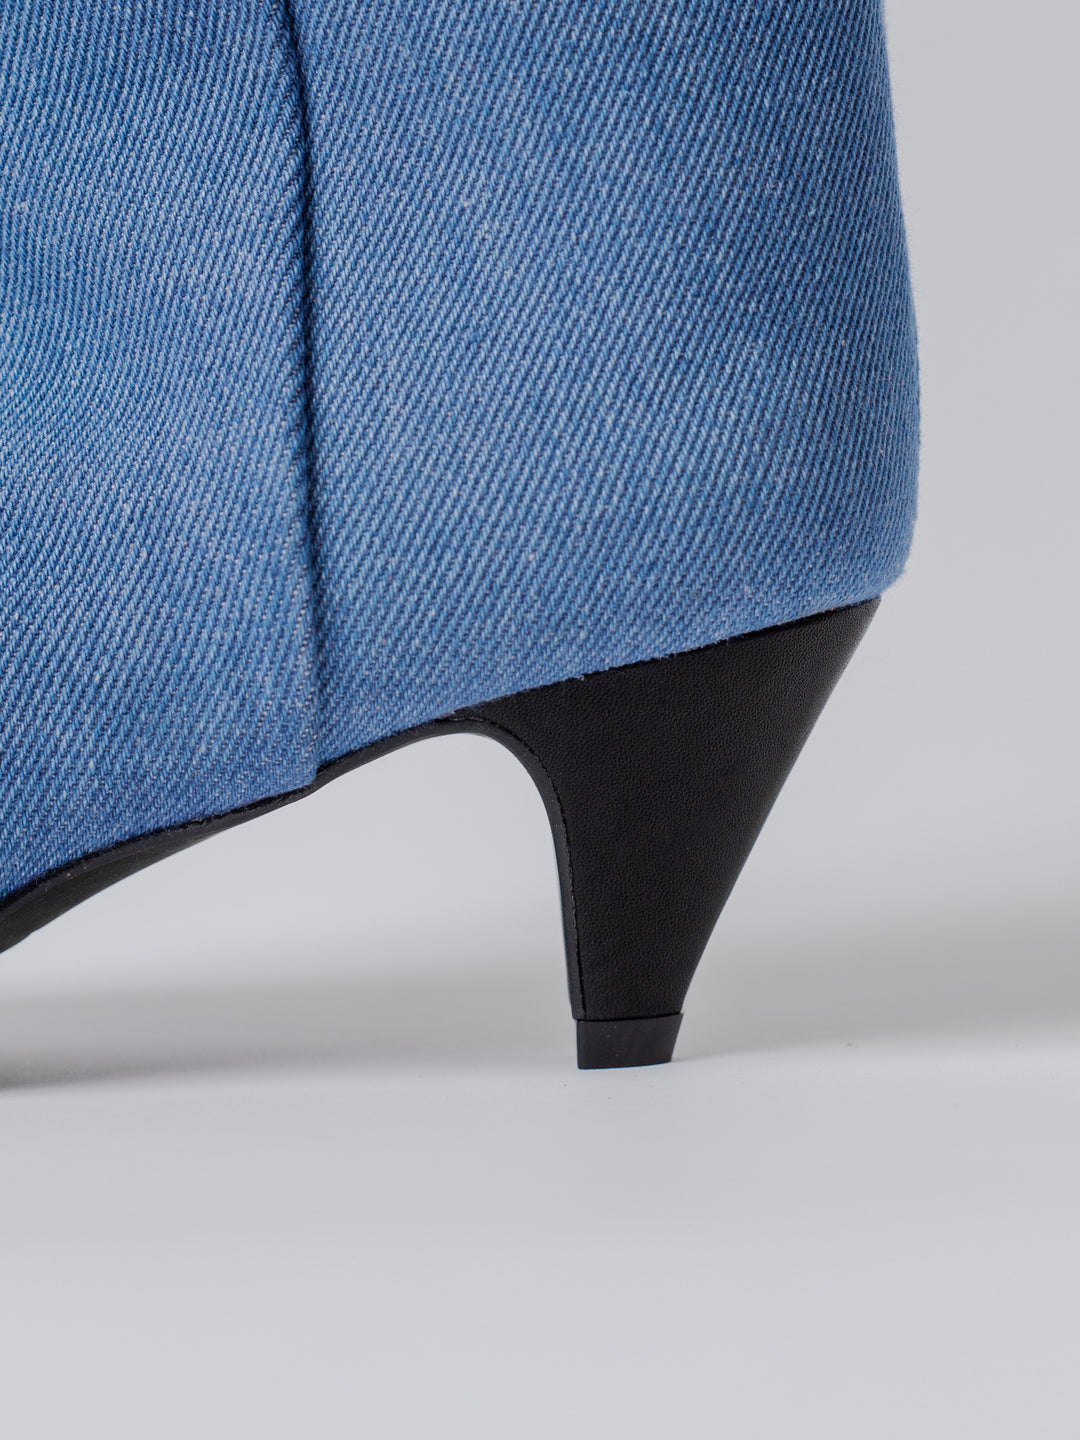 Blankens The Vanessa Tall Denim. high boot, walkable heel height. straight shaft. Rubber mix sole. Inner lining in leather. detail photo of the heel